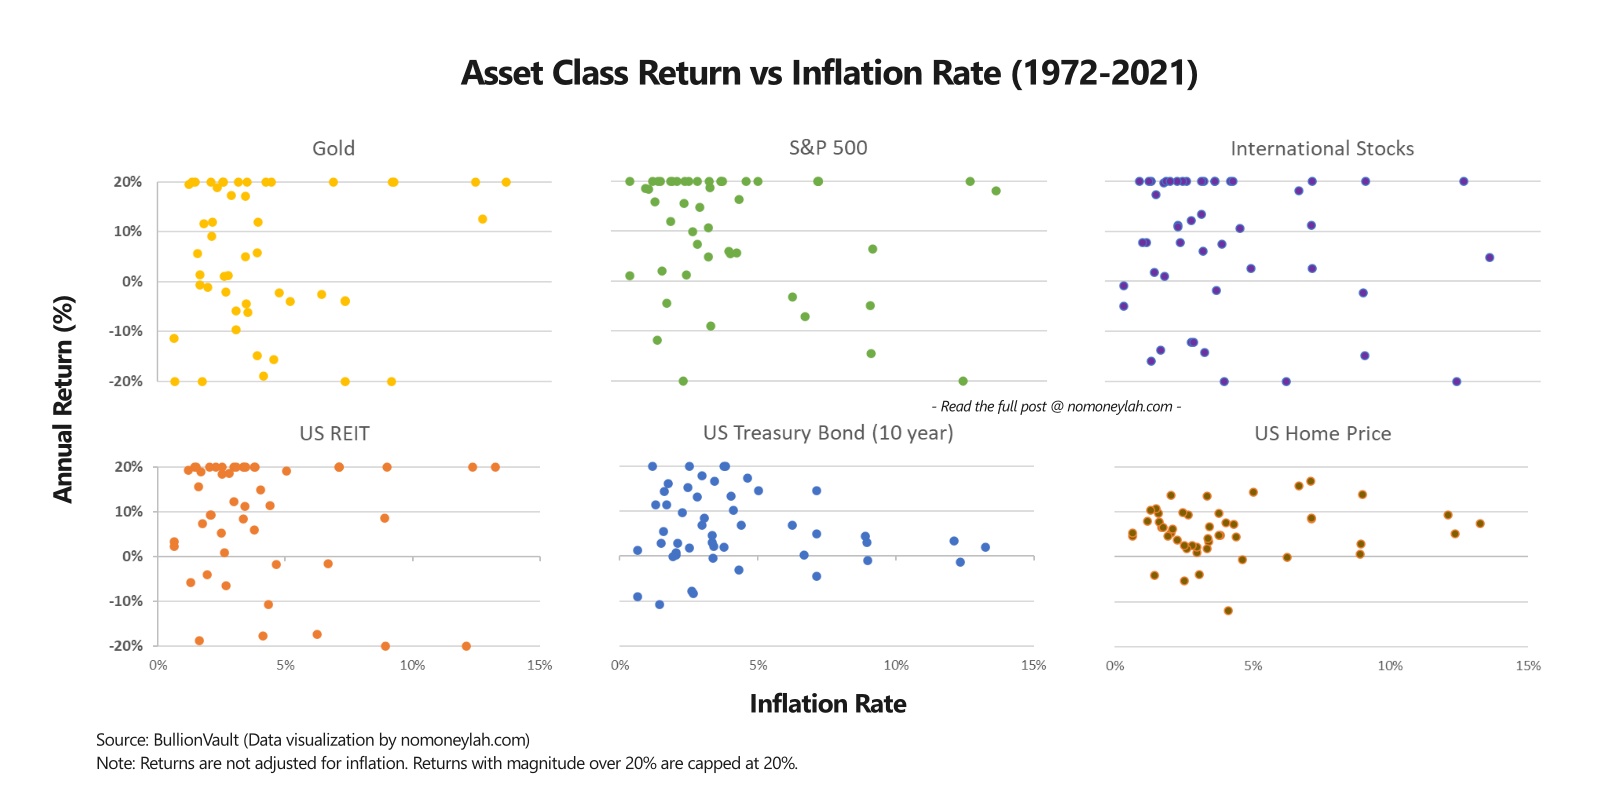 Non-inflation adjusted asset class return vs inflation rate